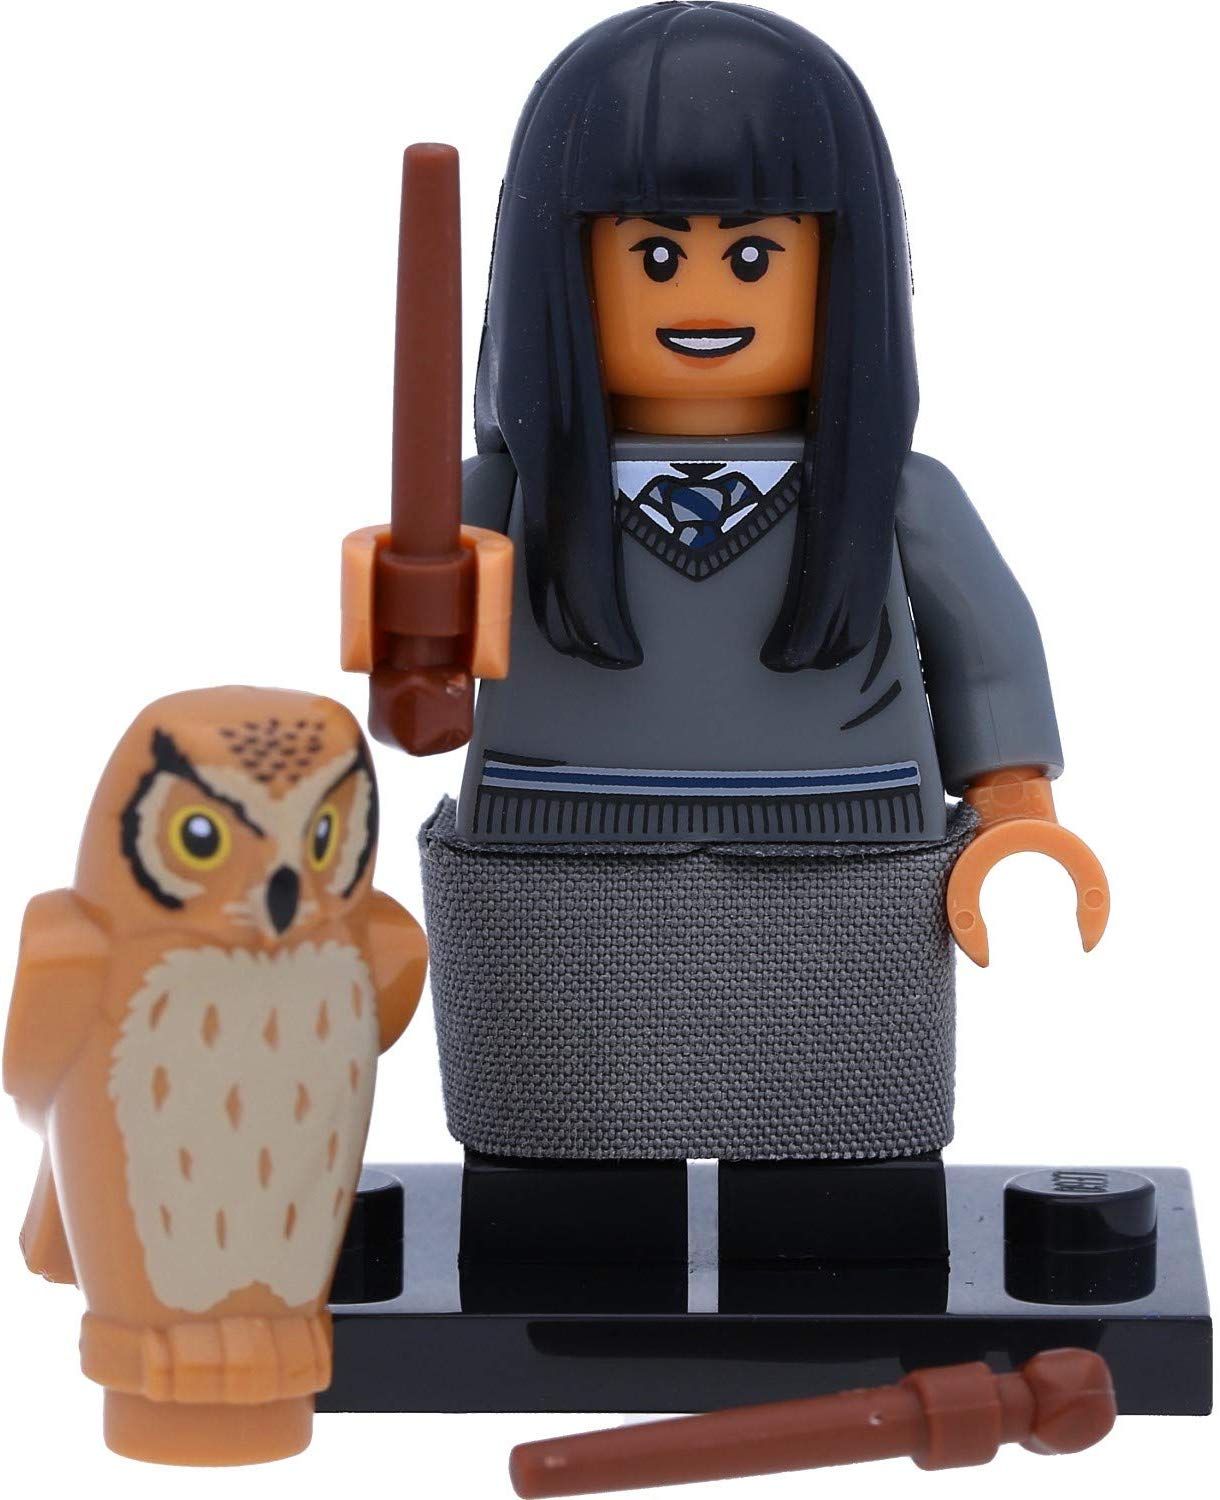 Lego Harry Potter 71022 Collectable Figures